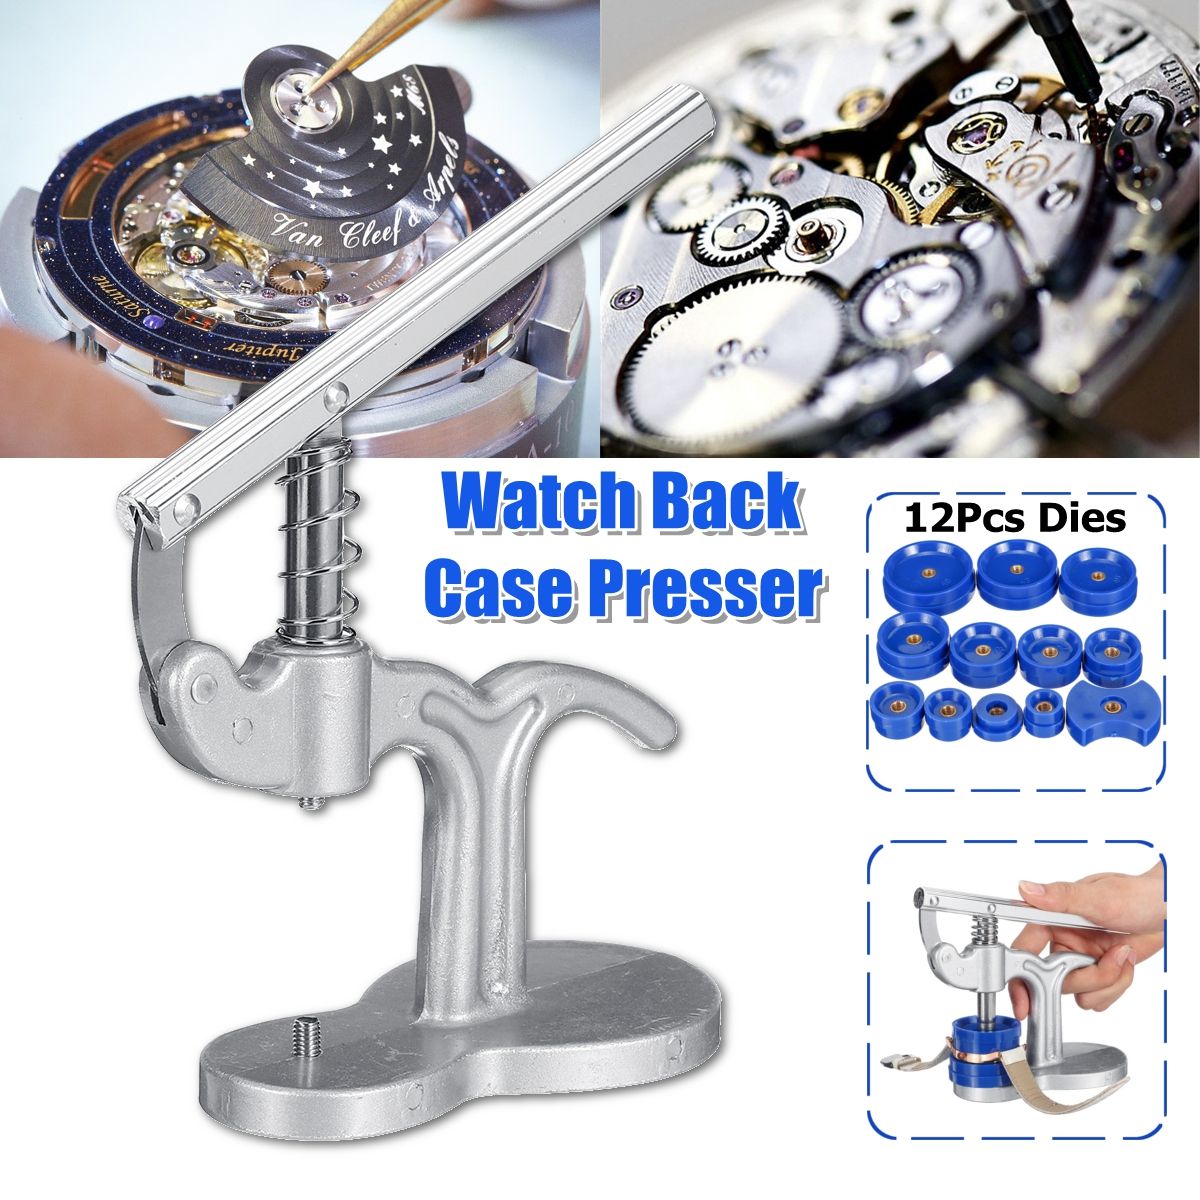 Watch-Back-Case-Cover-Press-Closer-Watchmaker-Presser-Repair-Tool-with-12-Dies-1542279